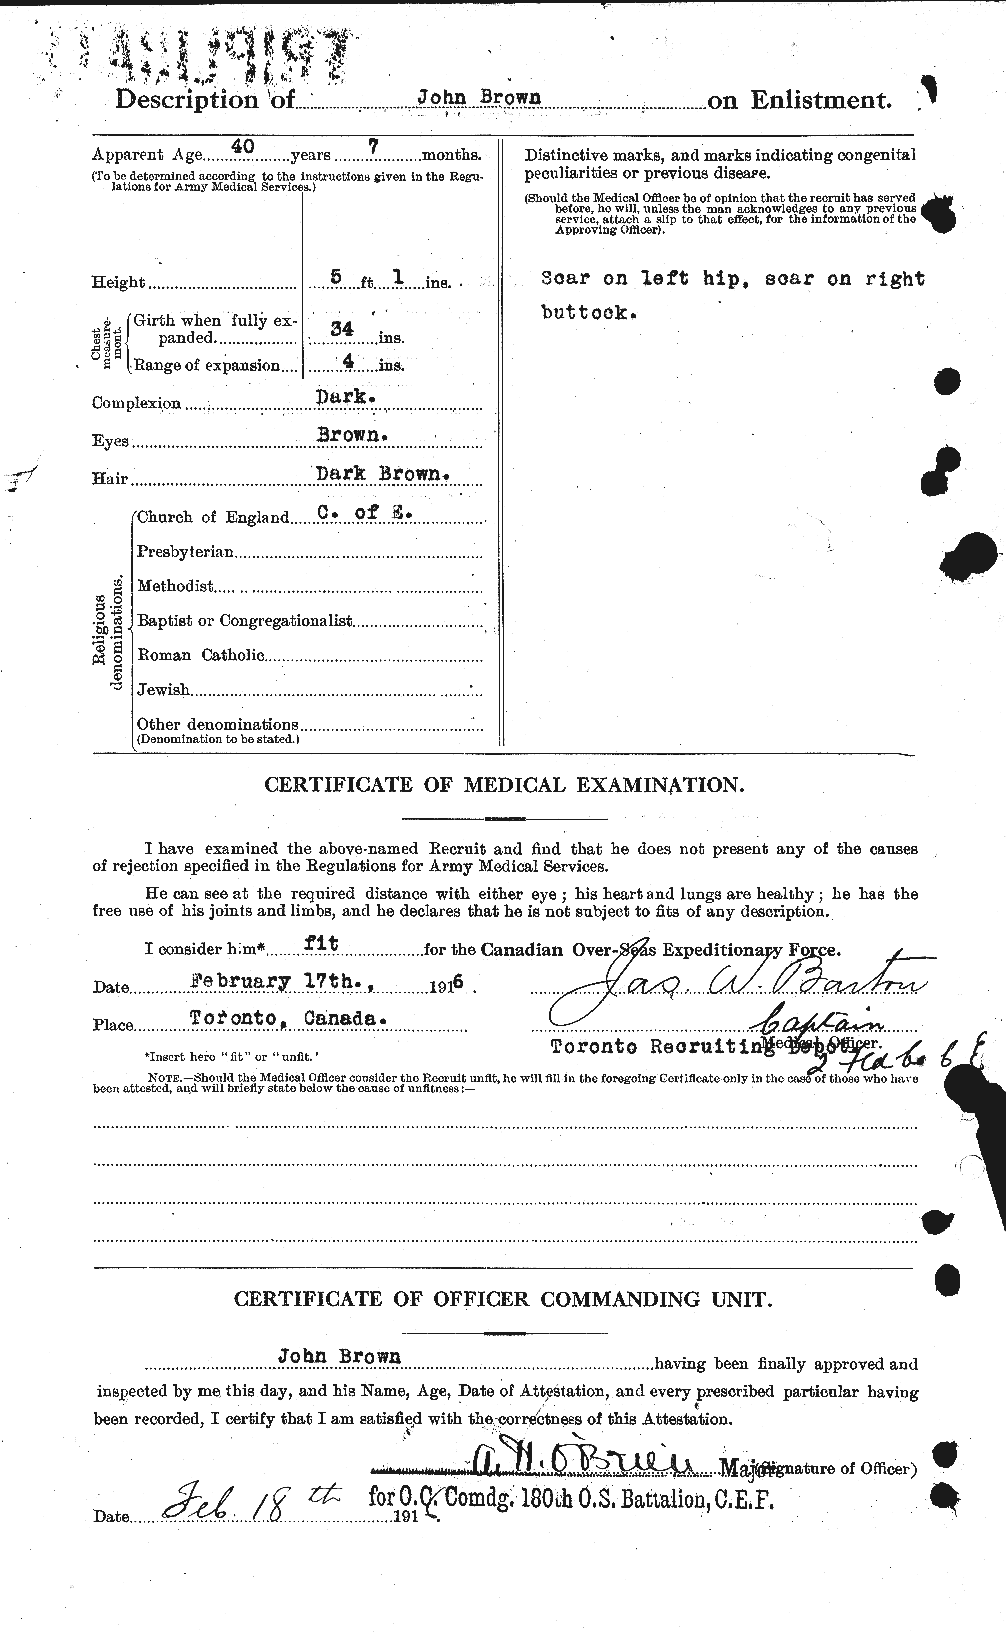 Personnel Records of the First World War - CEF 263869b